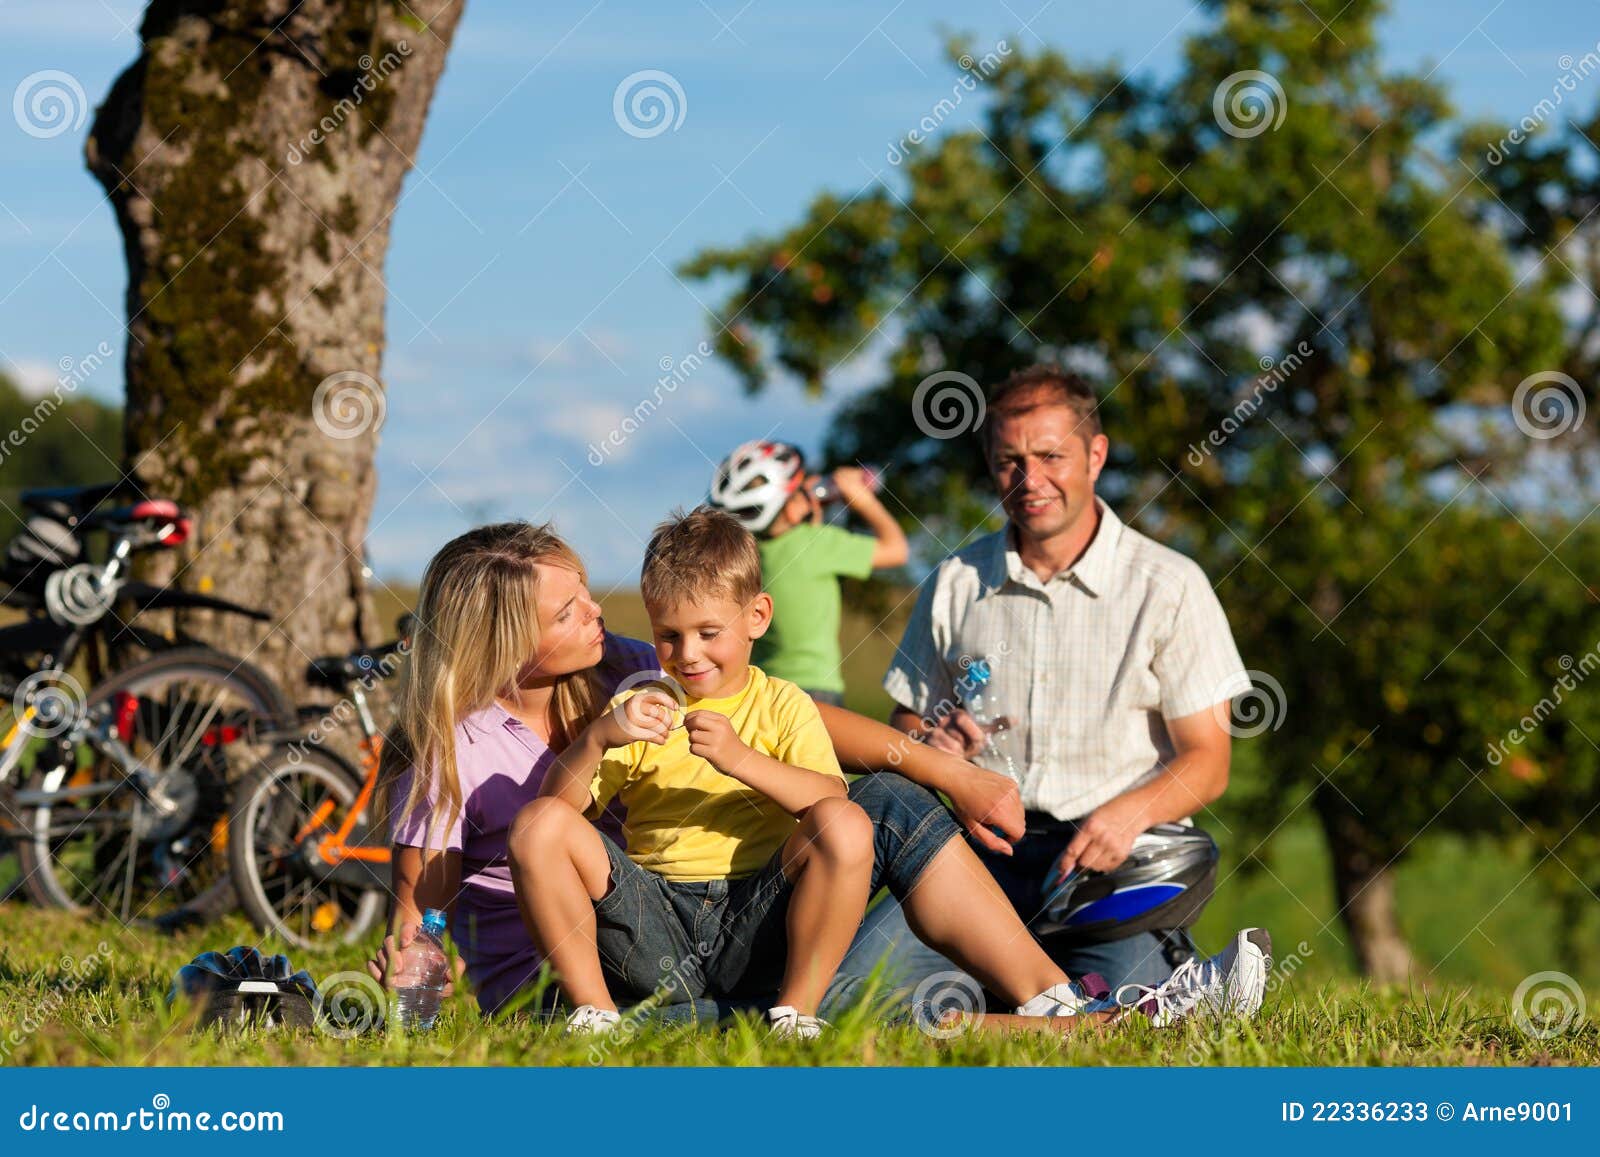 family on getaway with bikes